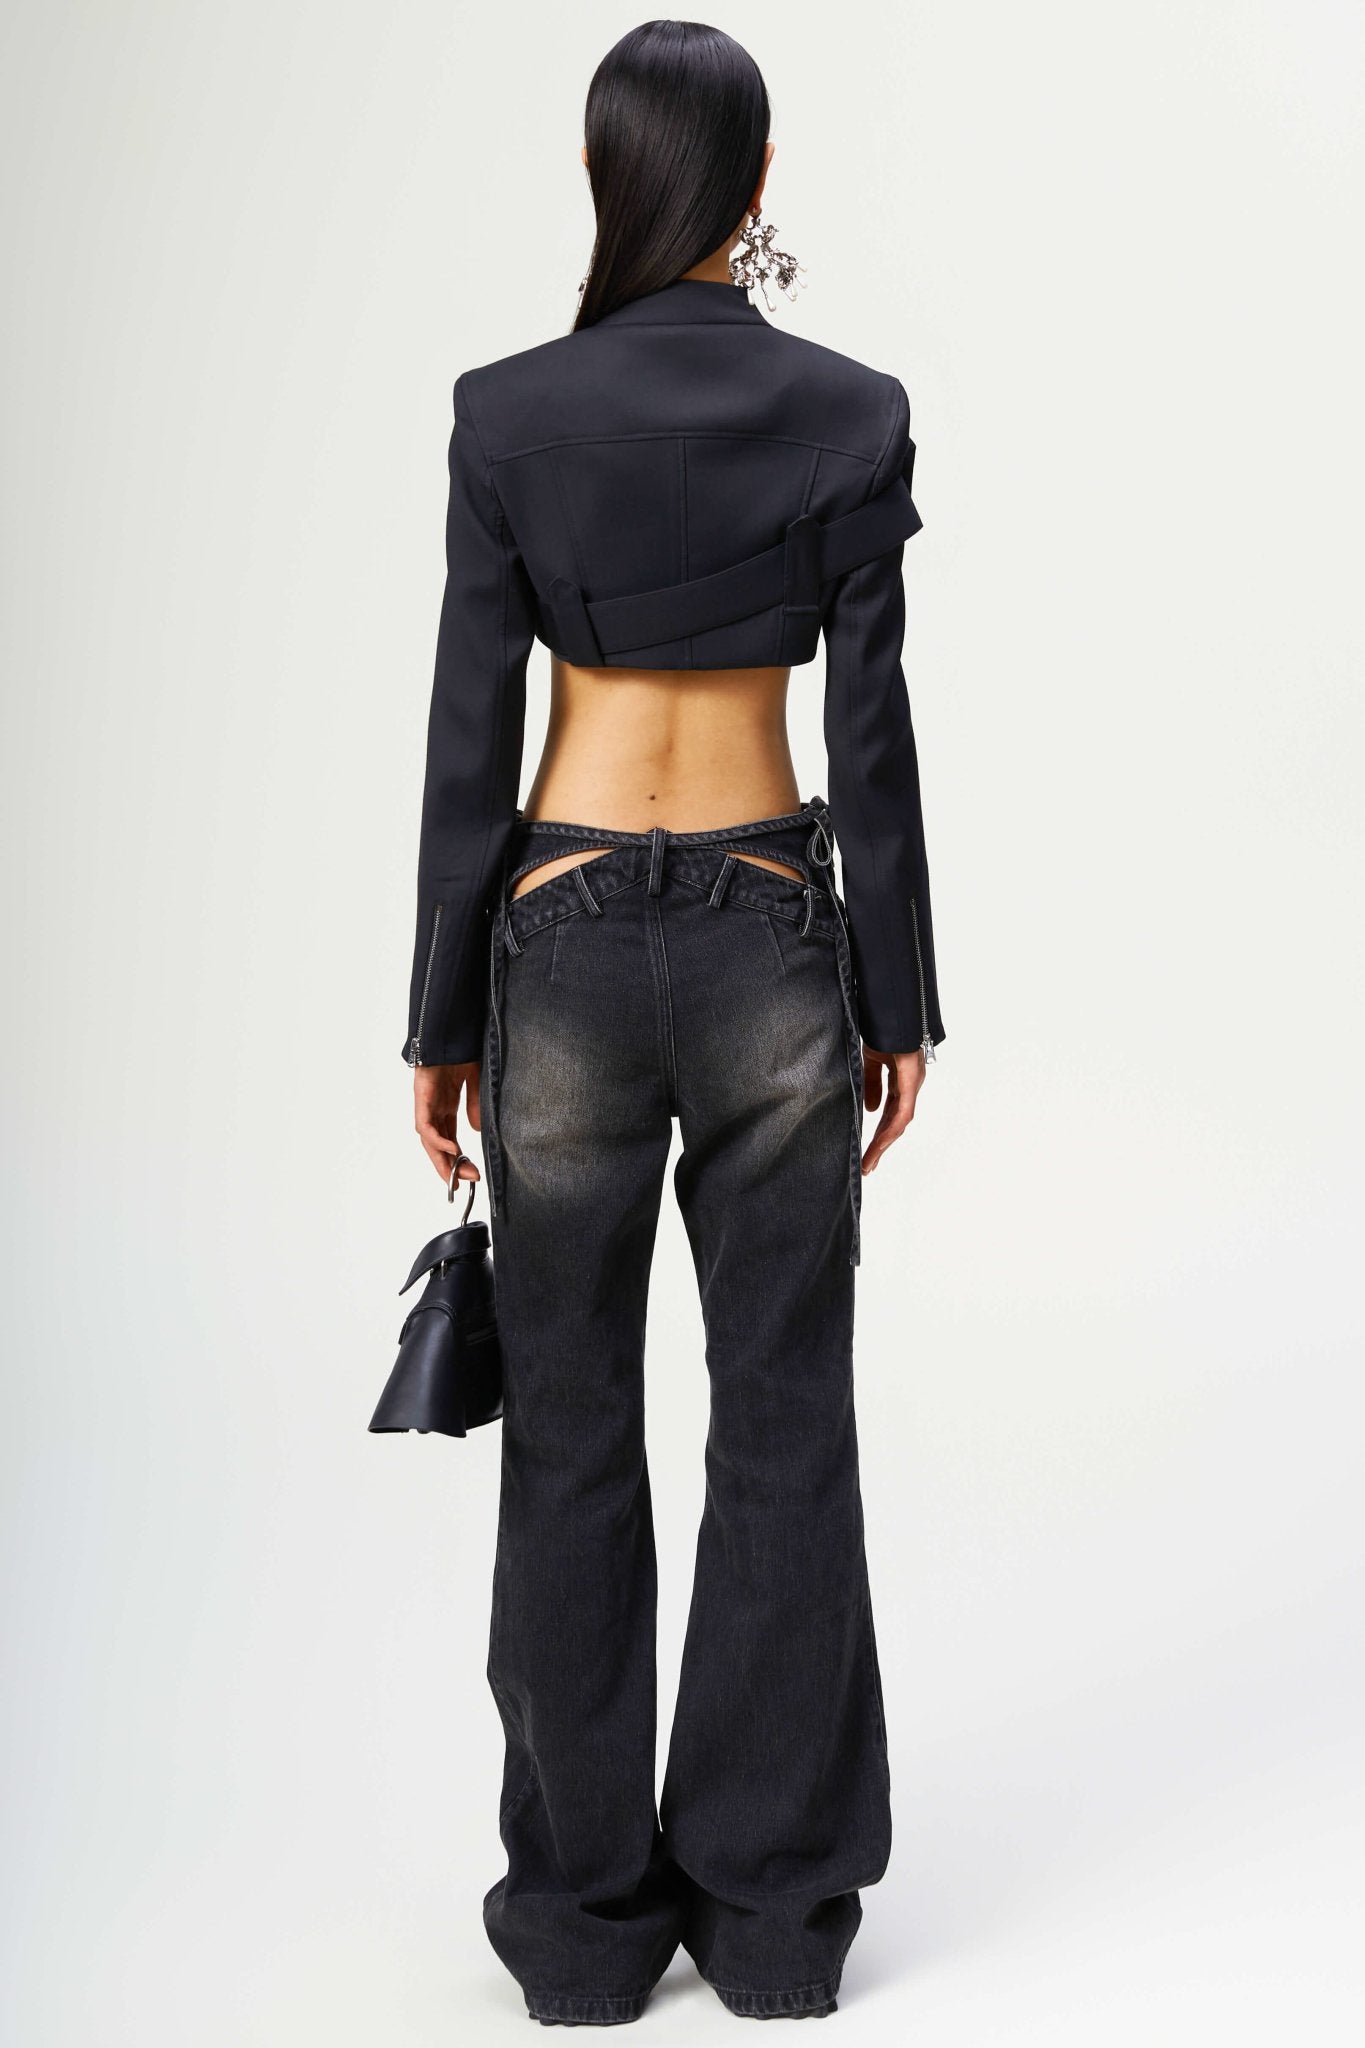 MARRKNULL Black Long Jeans | MADA IN CHINA